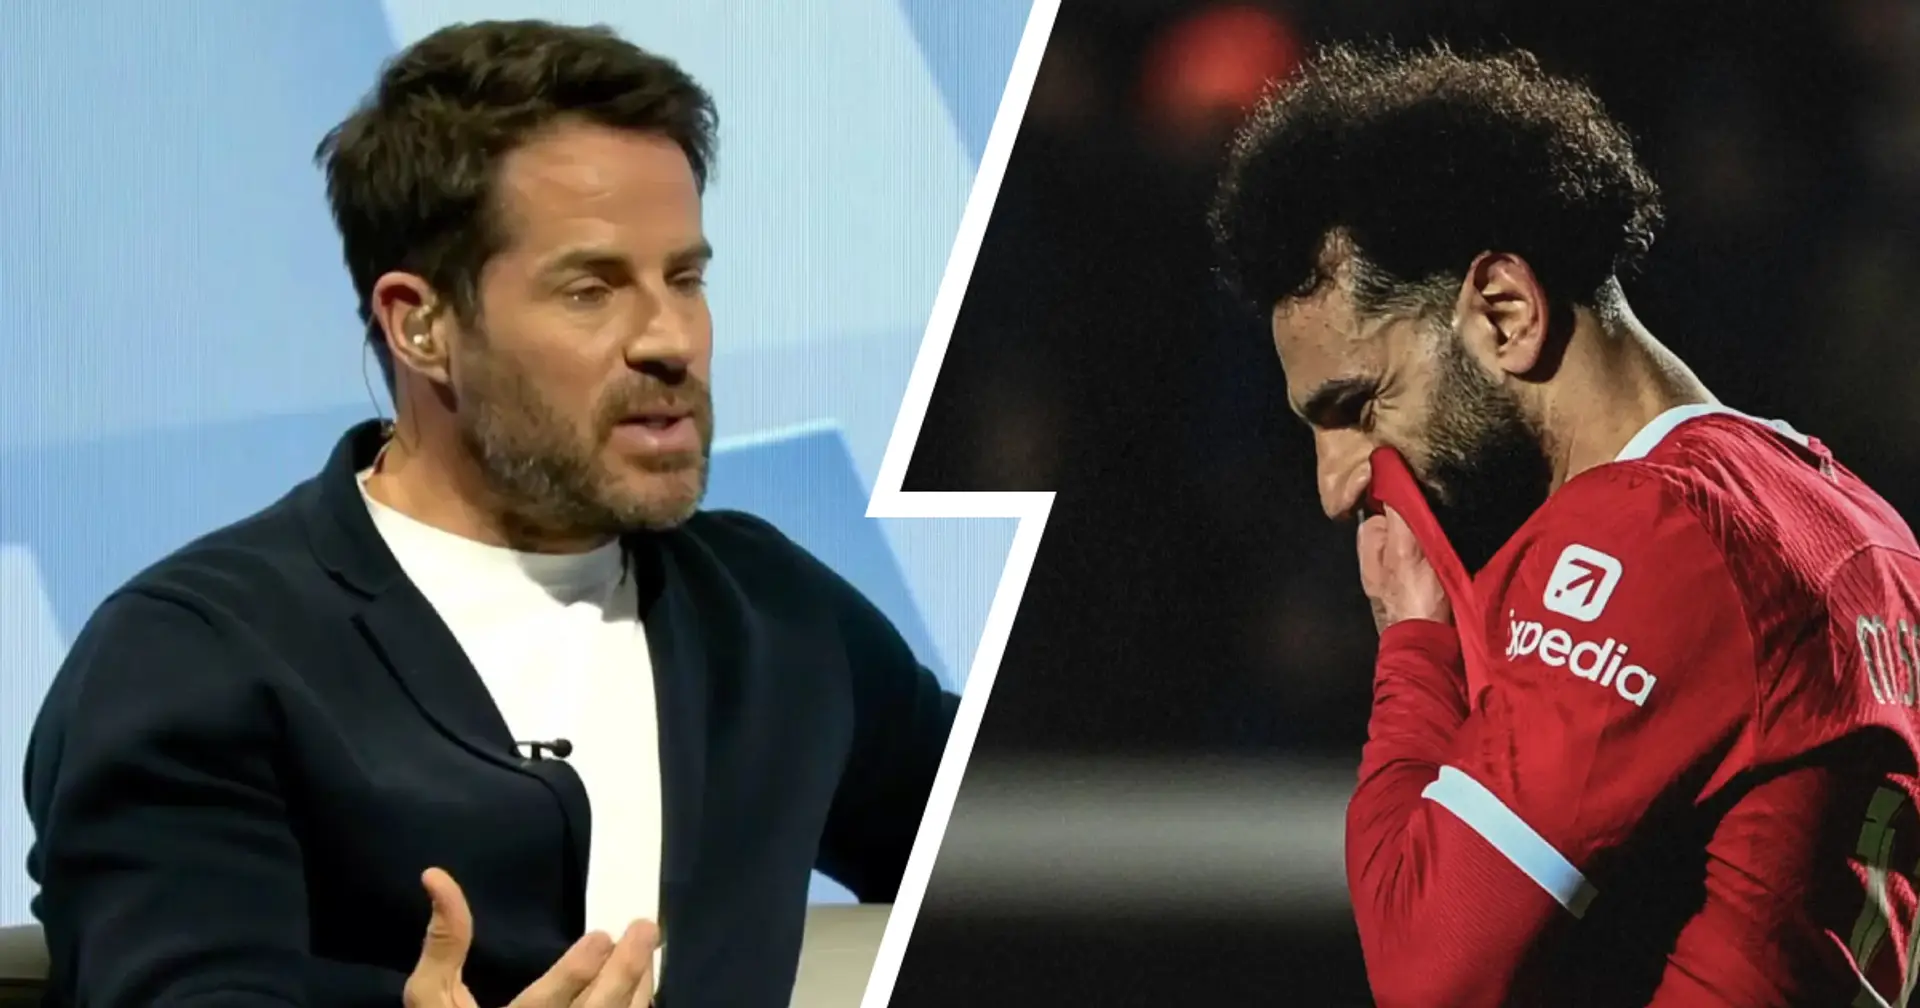 Jamie Redknapp believes Mo Salah time at Liverpool 'coming to an end'